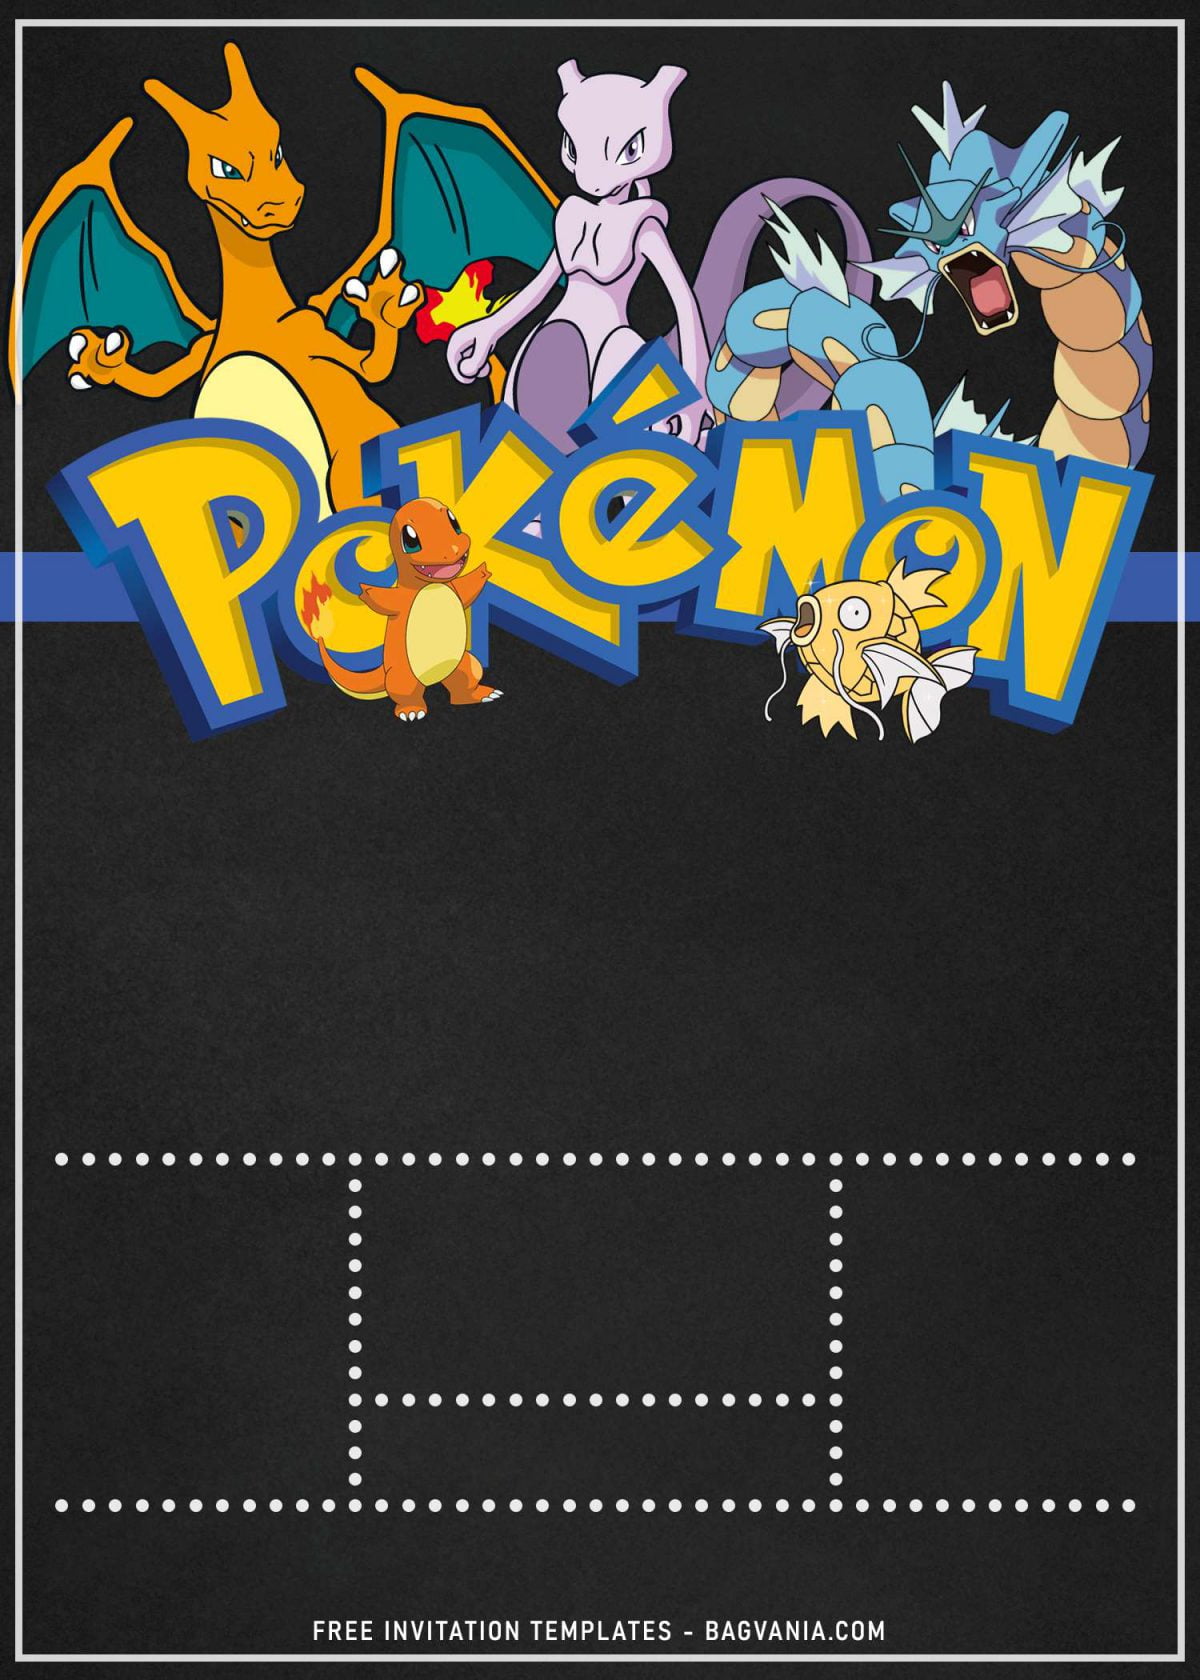 11+ Awesome Pokemon Chalkboard Invitation Templates For Boys Birthday Party and has cool Chalkboard background